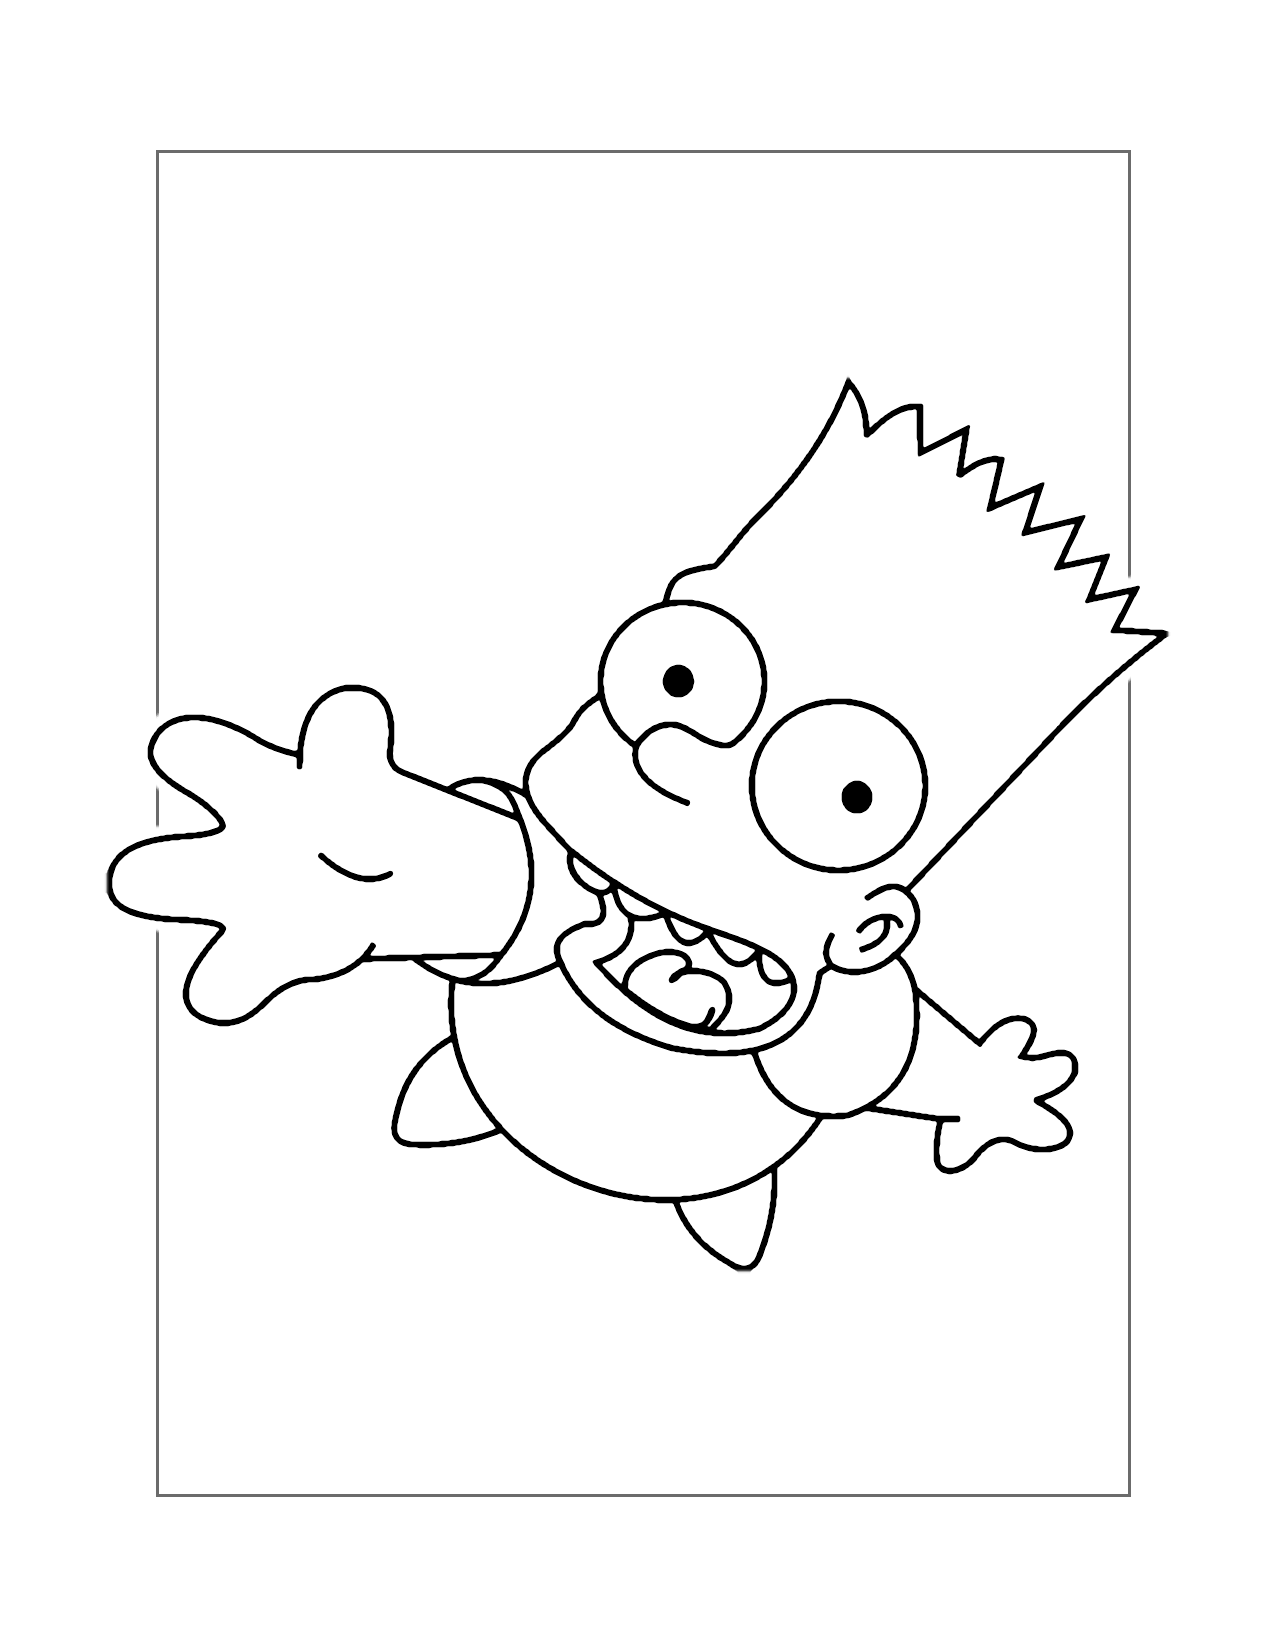 Bart Simpson Holding Out His Hand Coloring Page